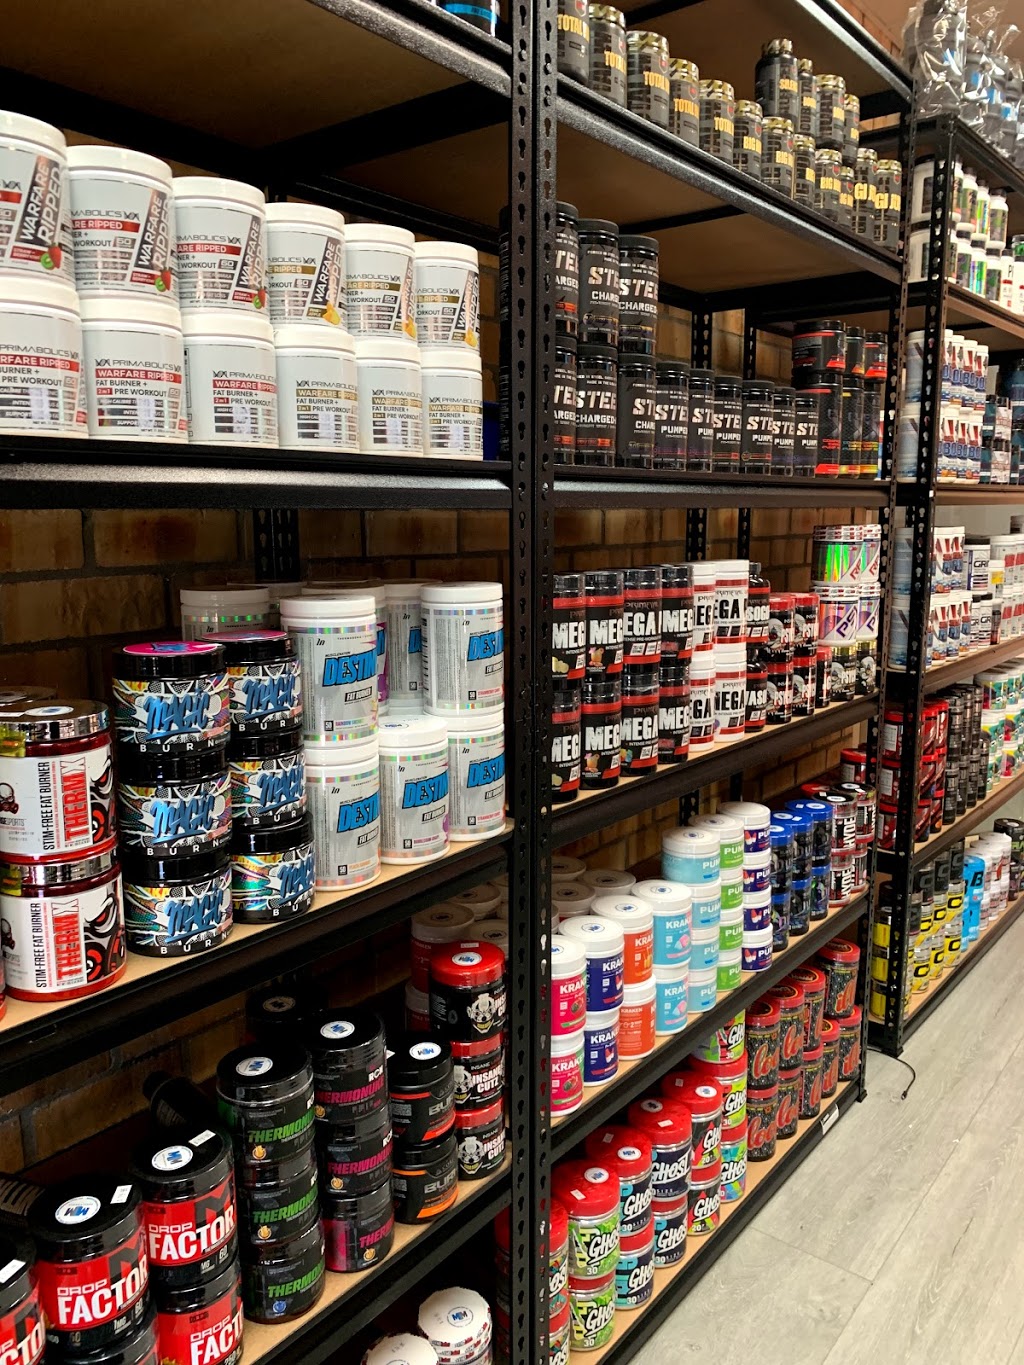 Muscle Maker Supplements Rutherford | health | 7B/15 N Mall, Rutherford NSW 2320, Australia | 0240302194 OR +61 2 4030 2194